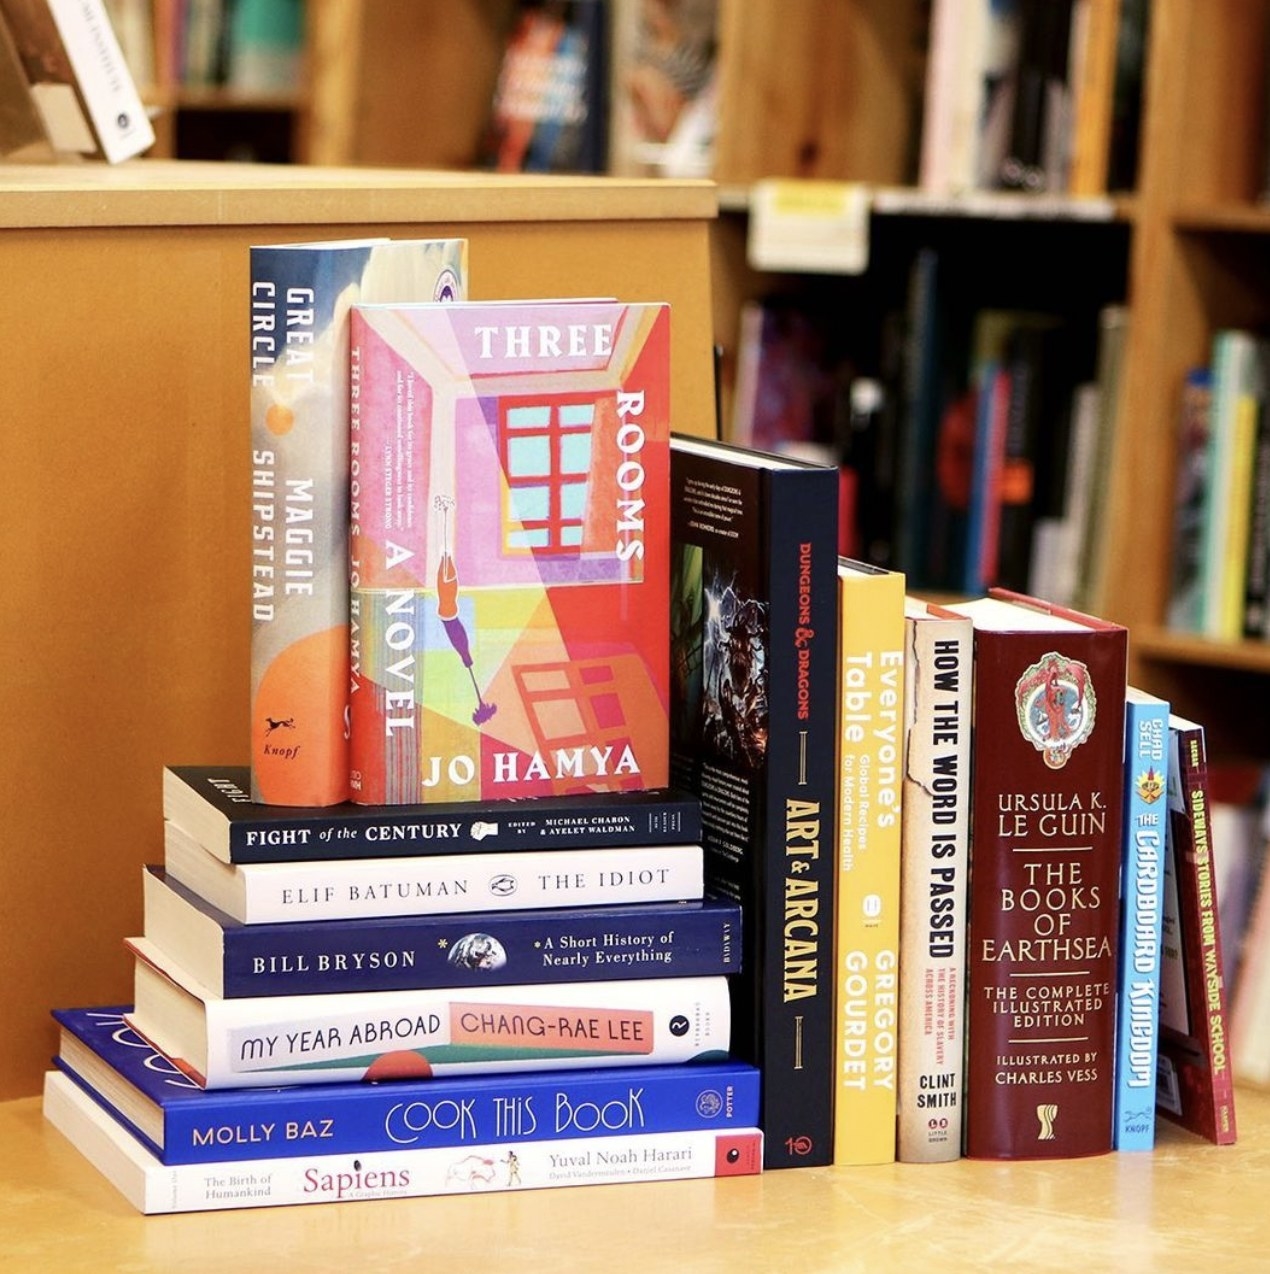 A stack of books on display at the in-person bookstore